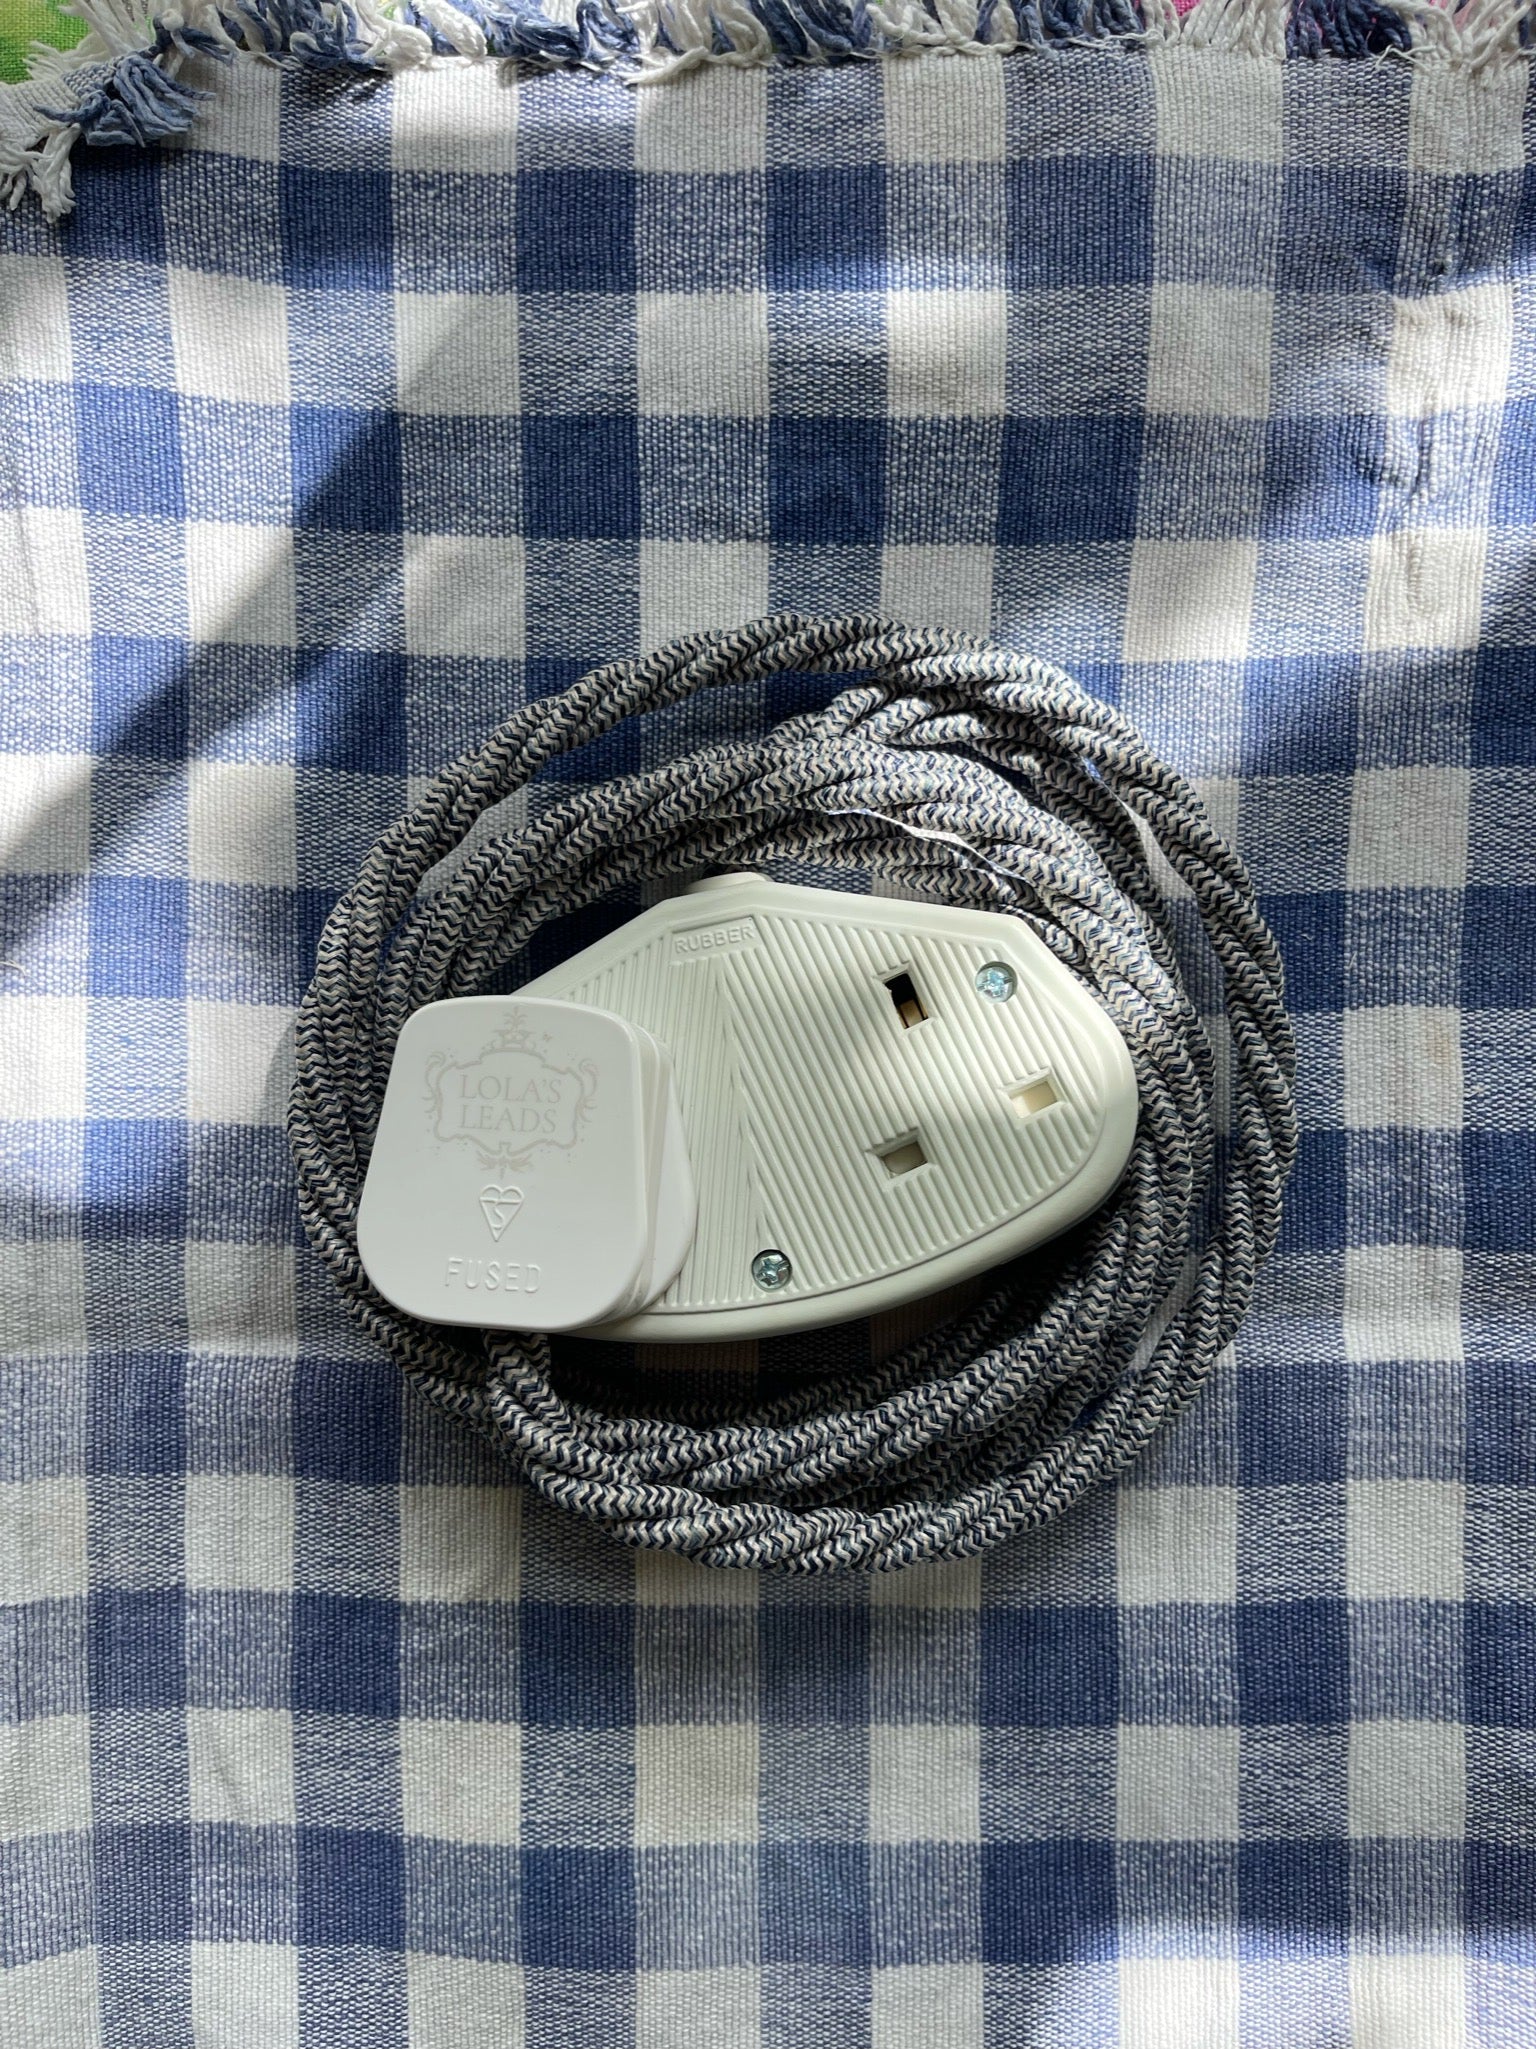 Lola's Leads Denim Blue Fabric Covered Extension Cable